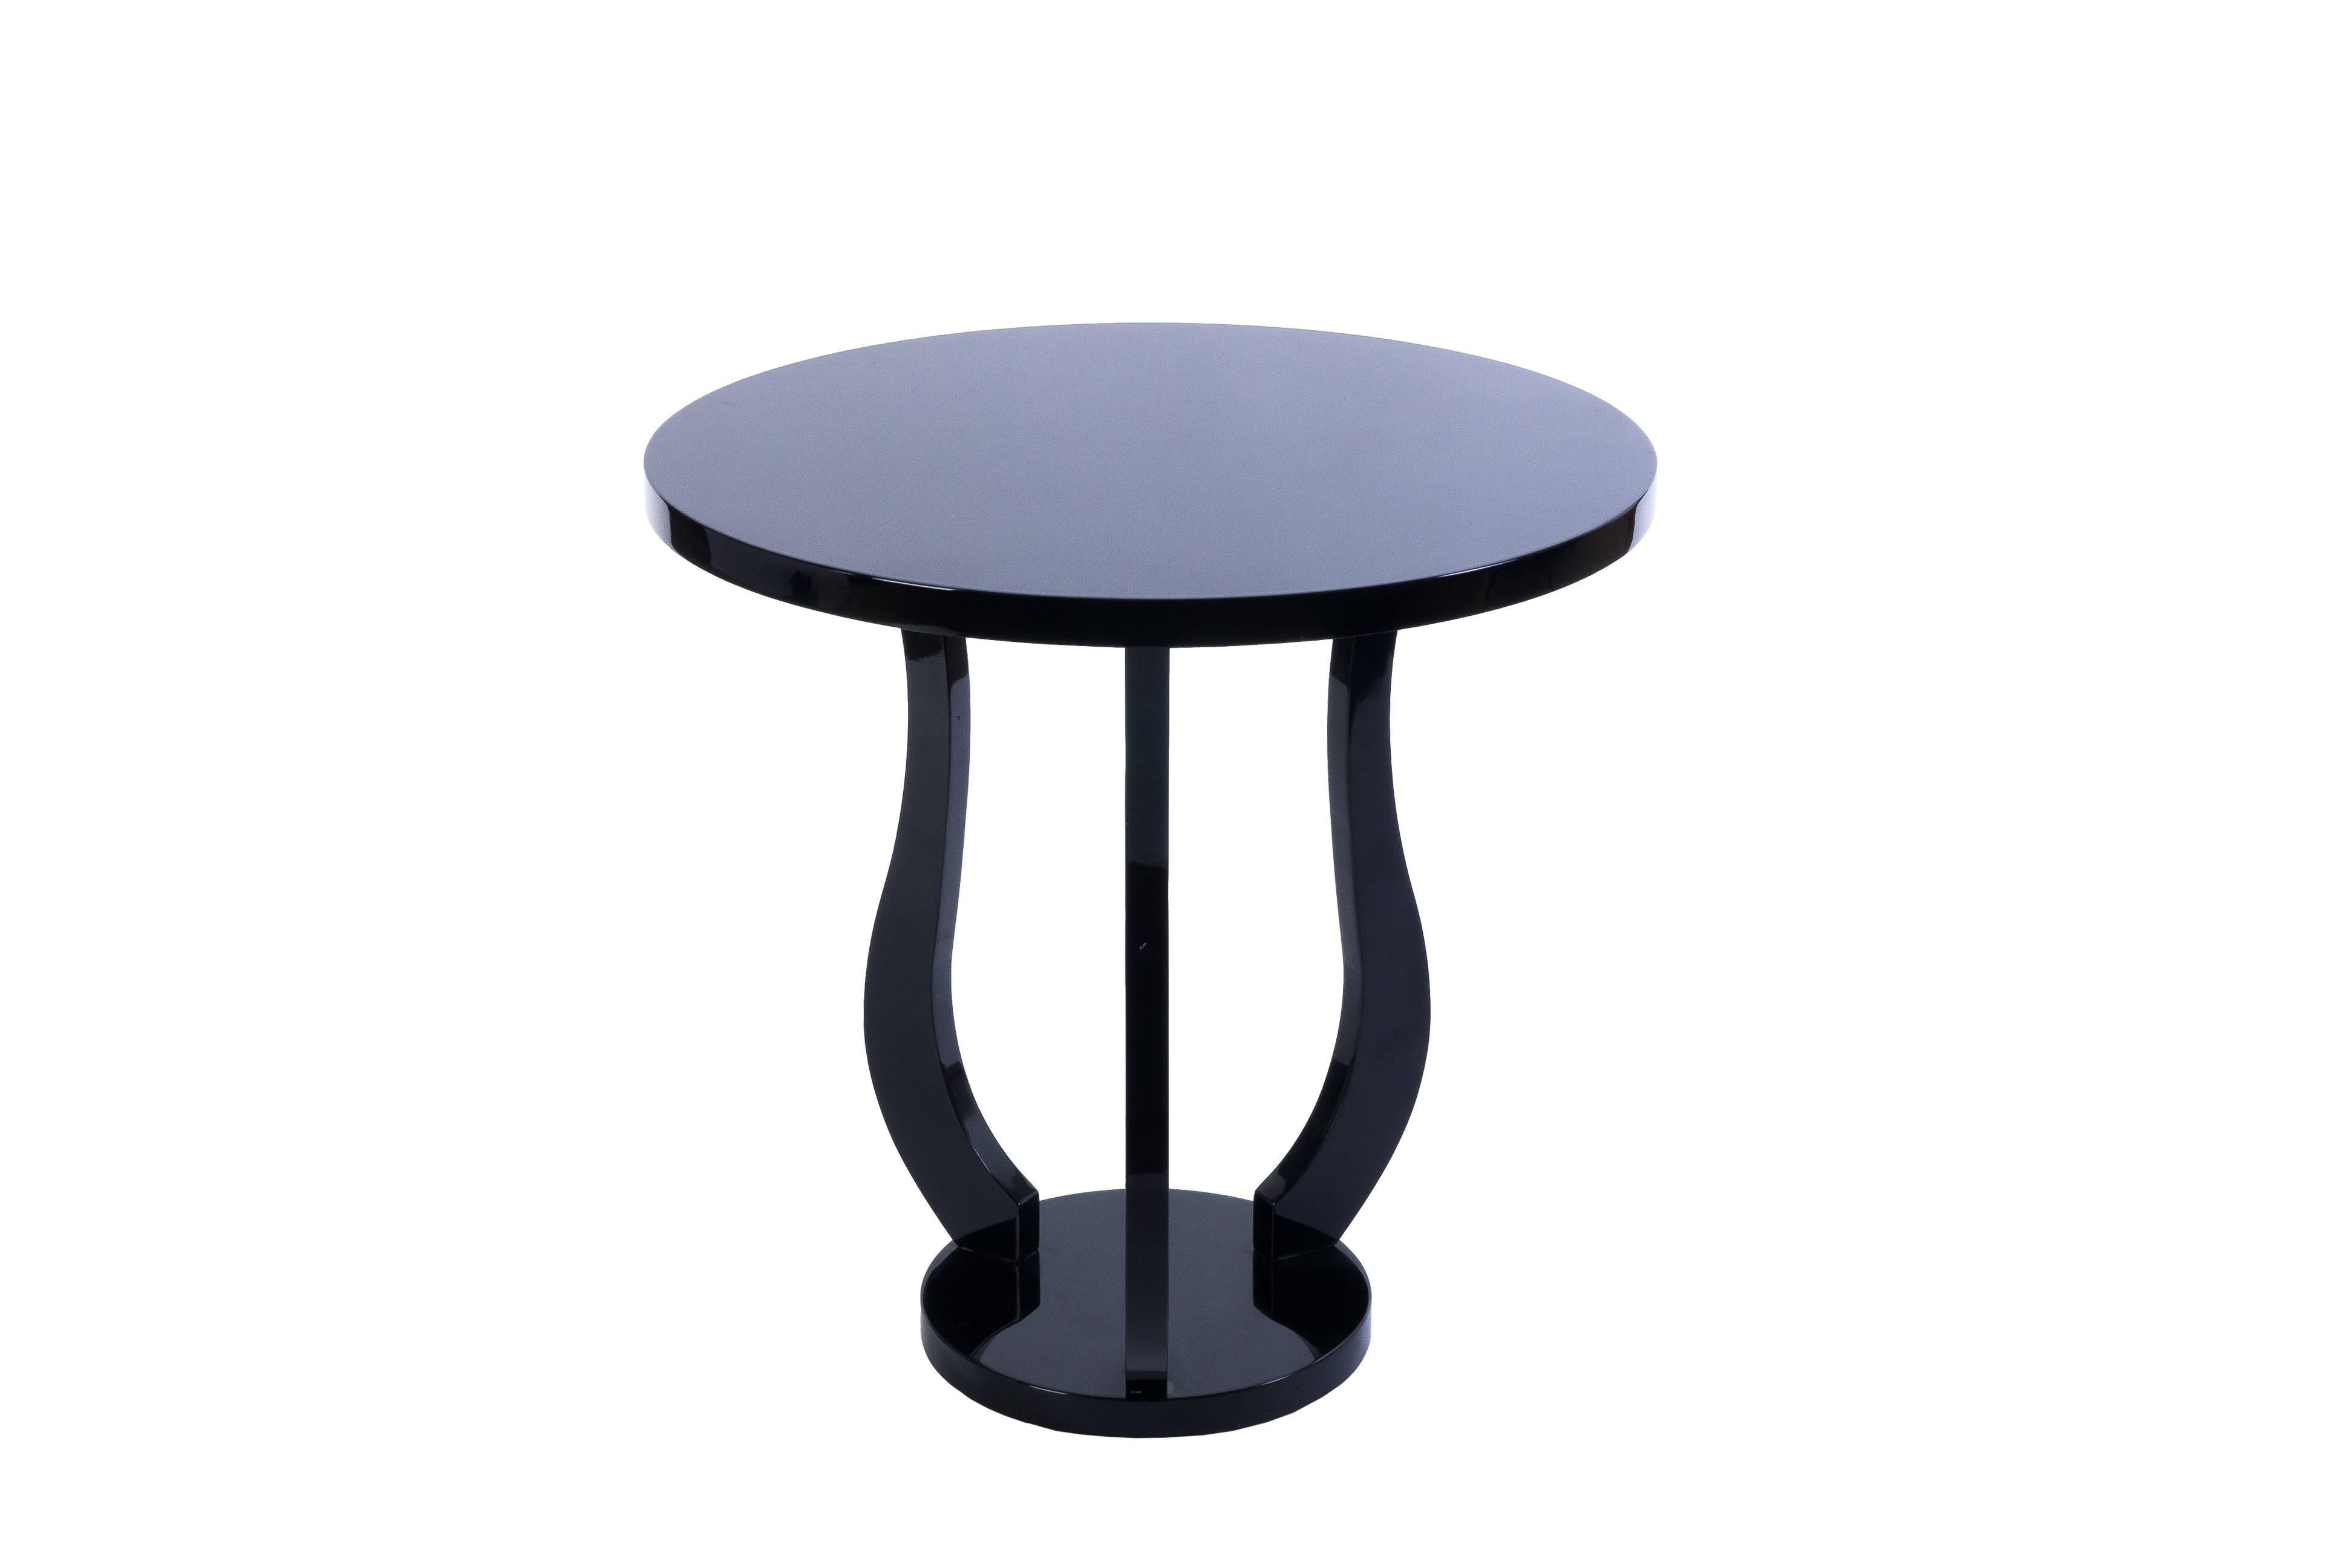 This gorgeous French Art Deco round side table features a tulip shape design in piano black lacquer.

Made in France, circa 1940.